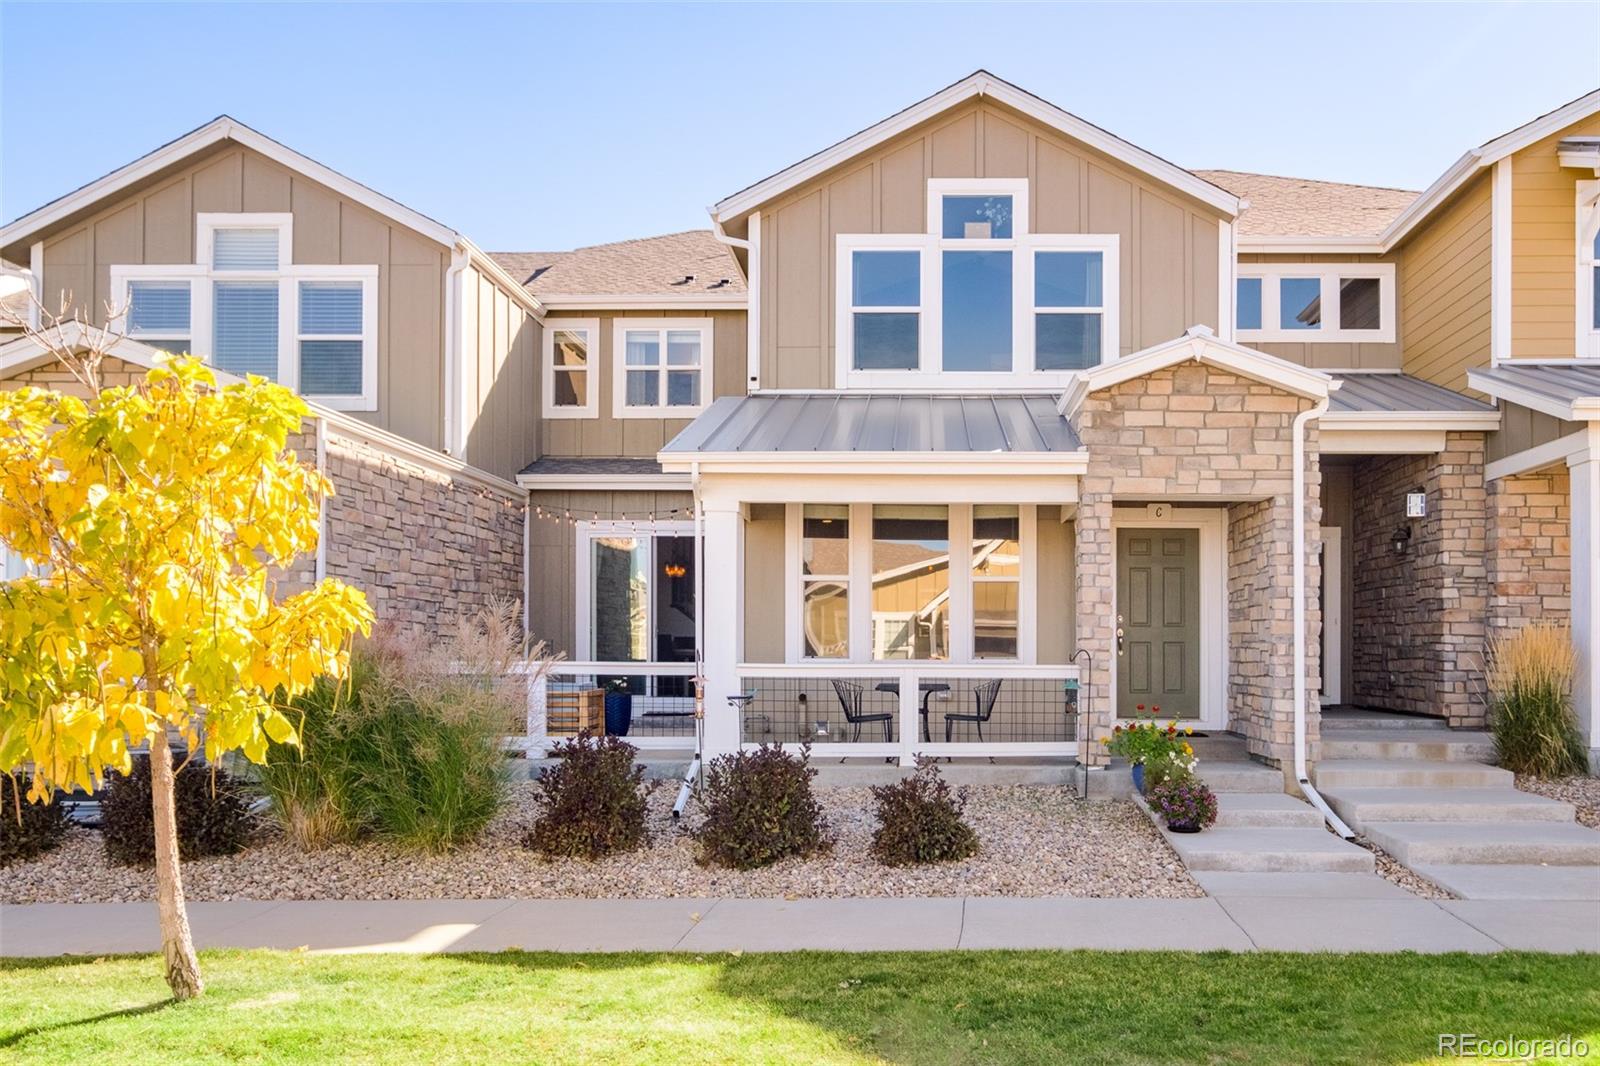 14274 W 88th Drive C, Arvada  MLS: 4798723 Beds: 4 Baths: 4 Price: $725,000